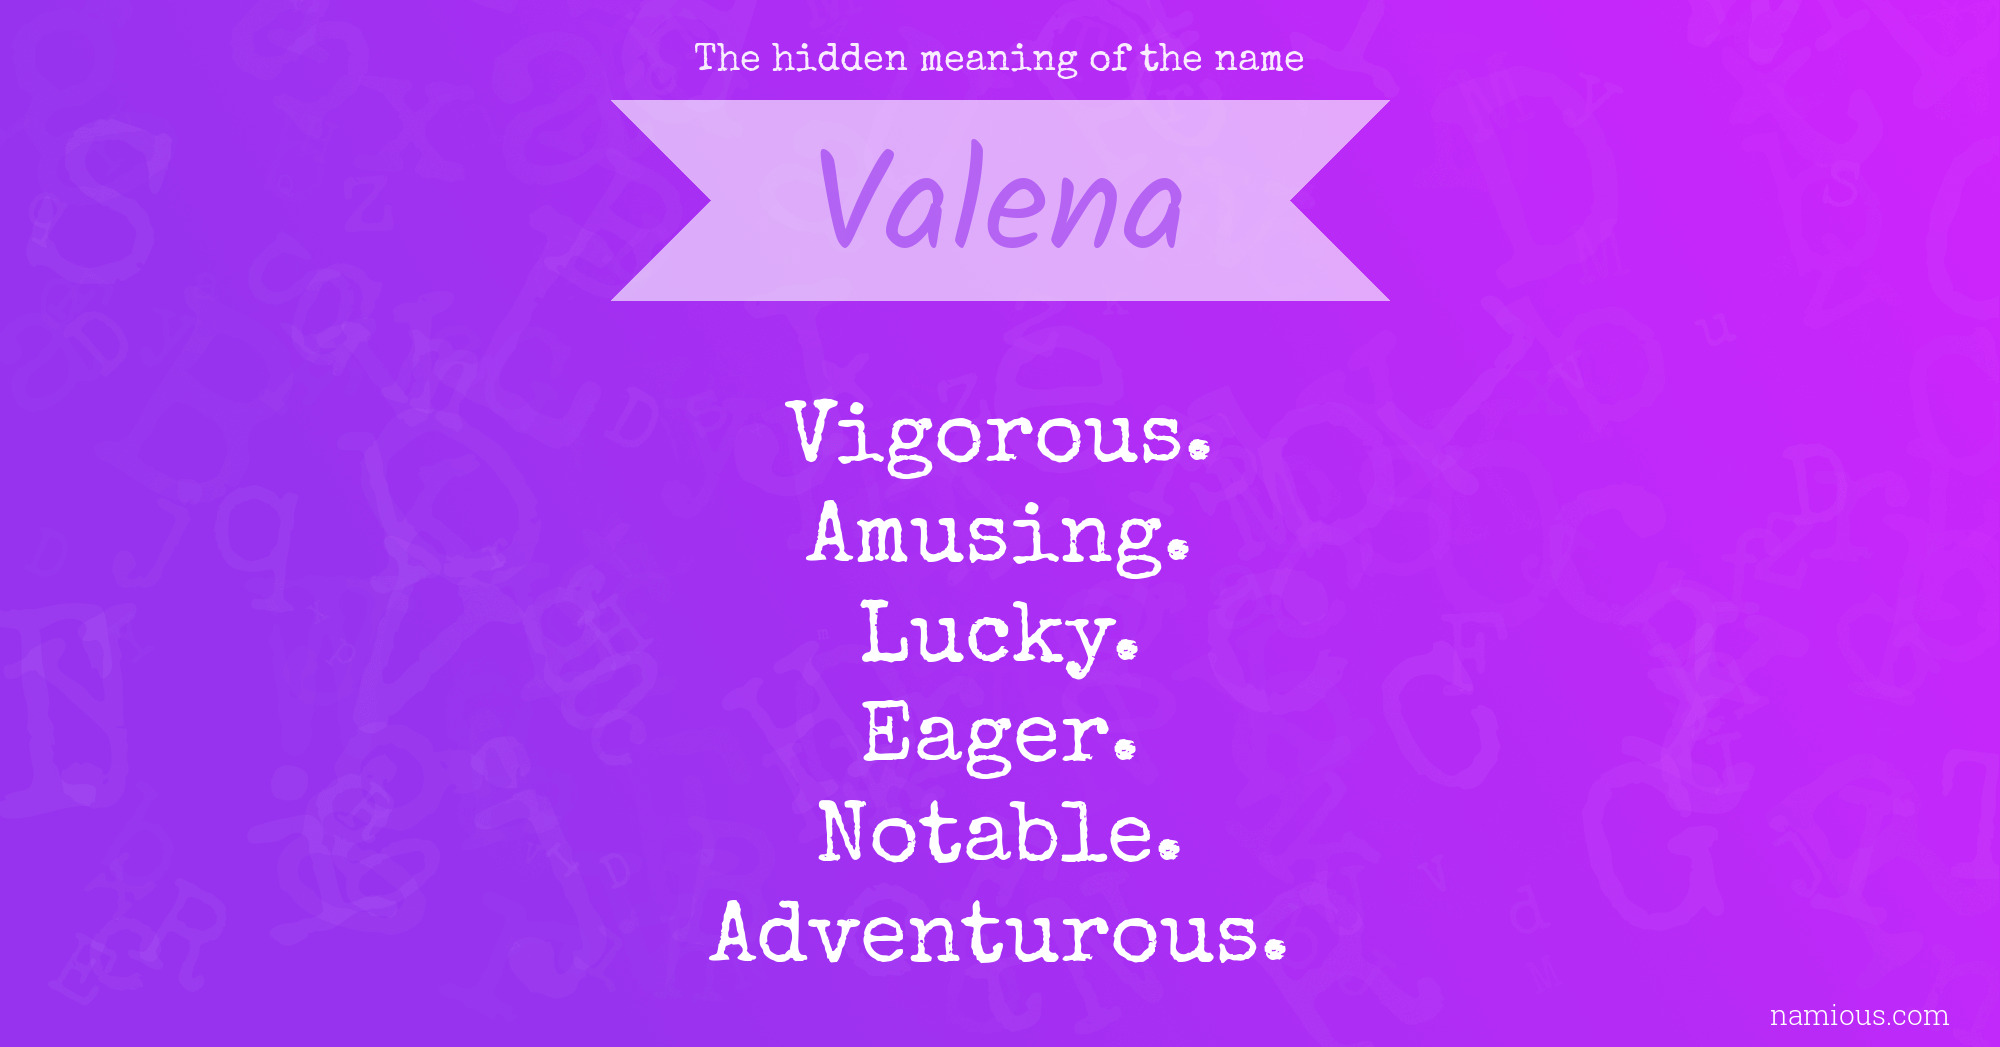 The hidden meaning of the name Valena